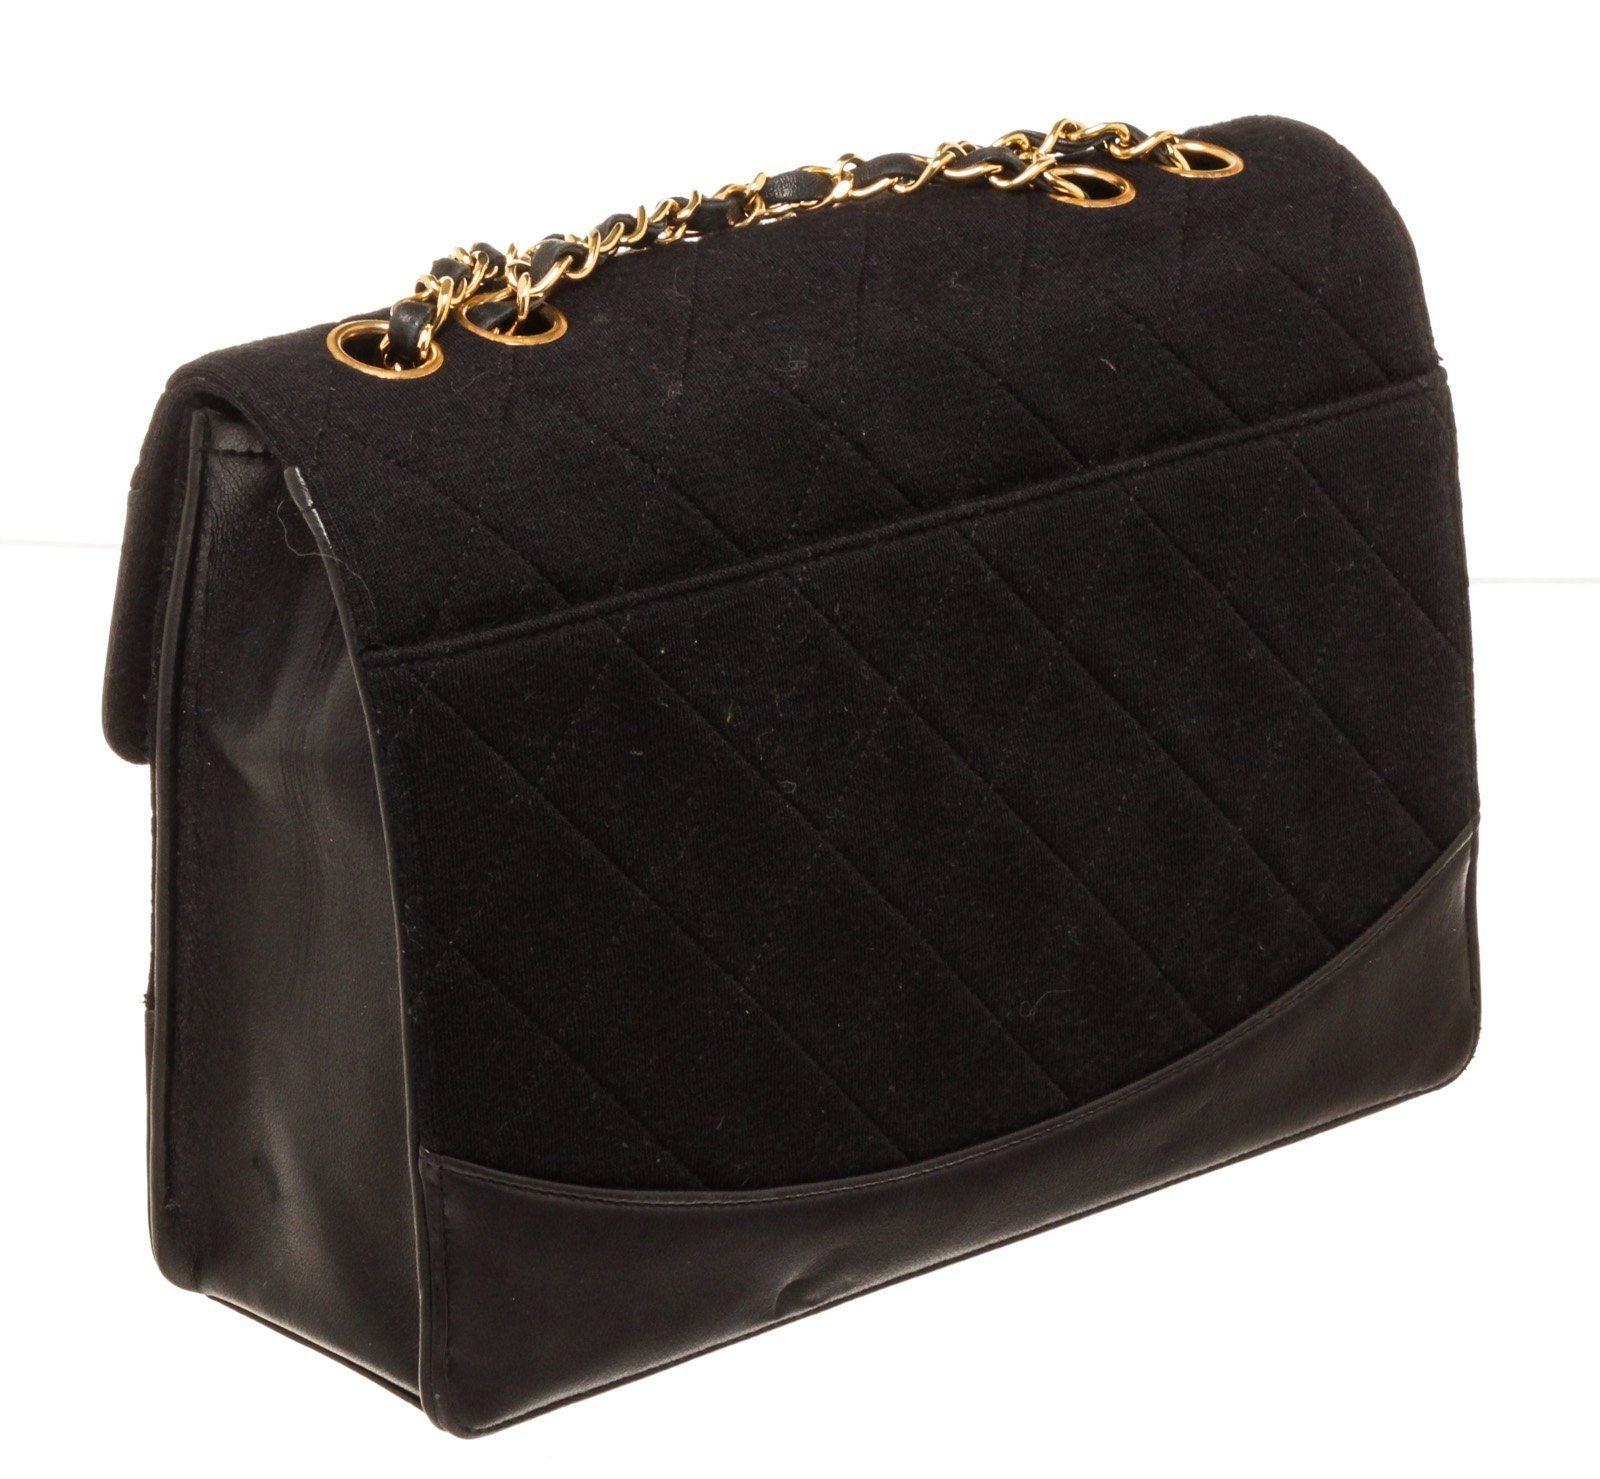 Chanel Jersey Leather Vintage Mademio Flap Bag in Black